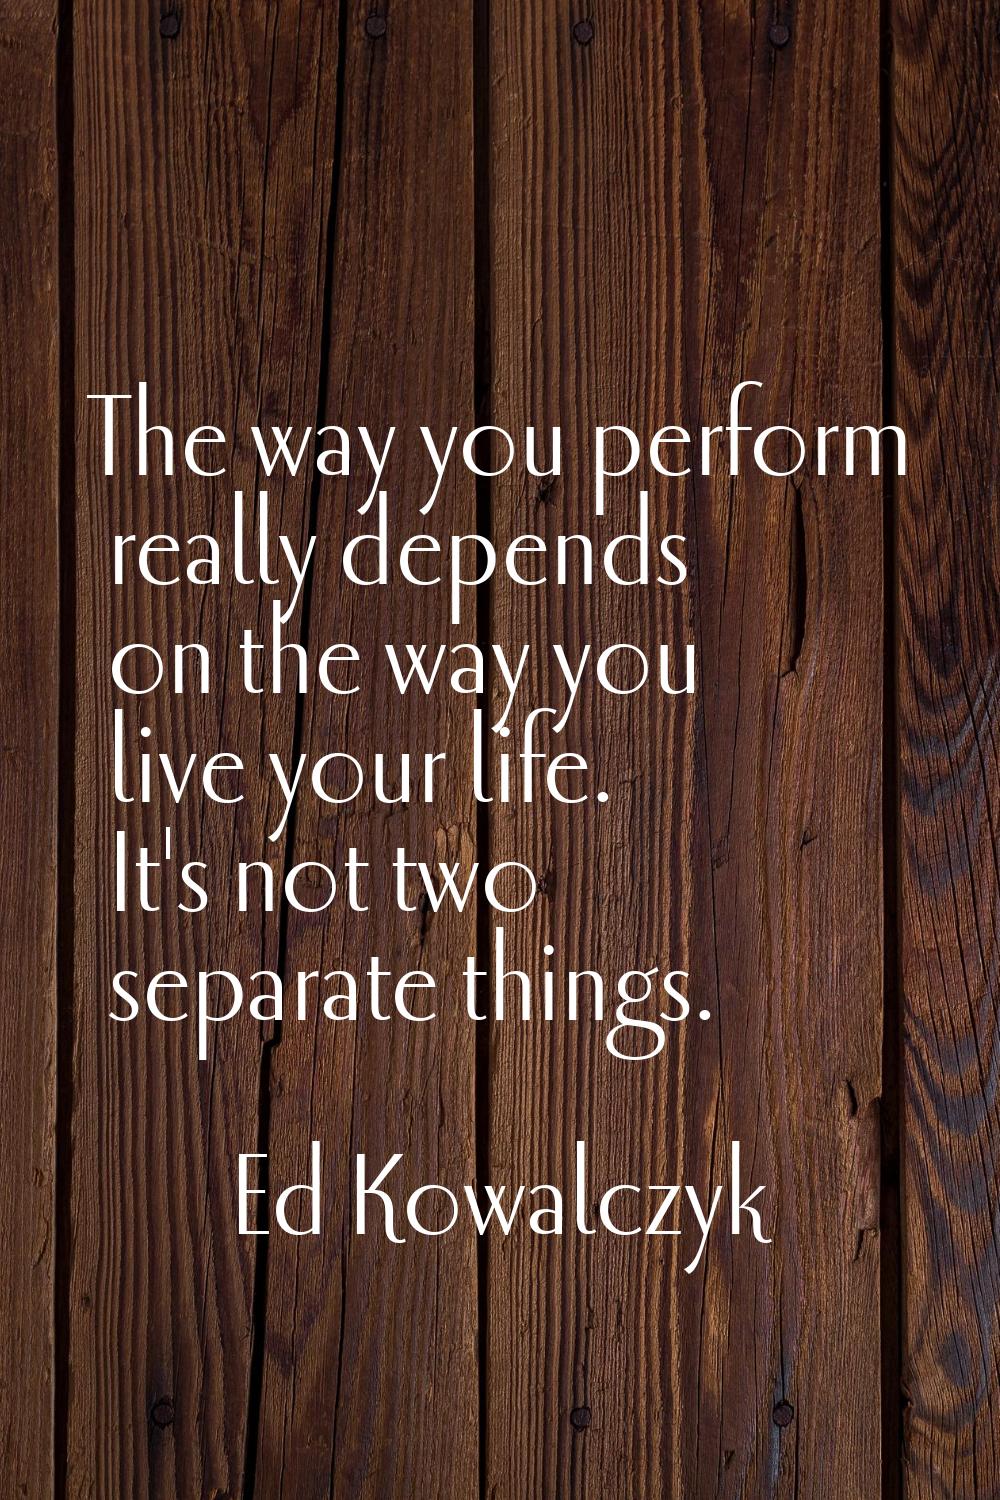 The way you perform really depends on the way you live your life. It's not two separate things.